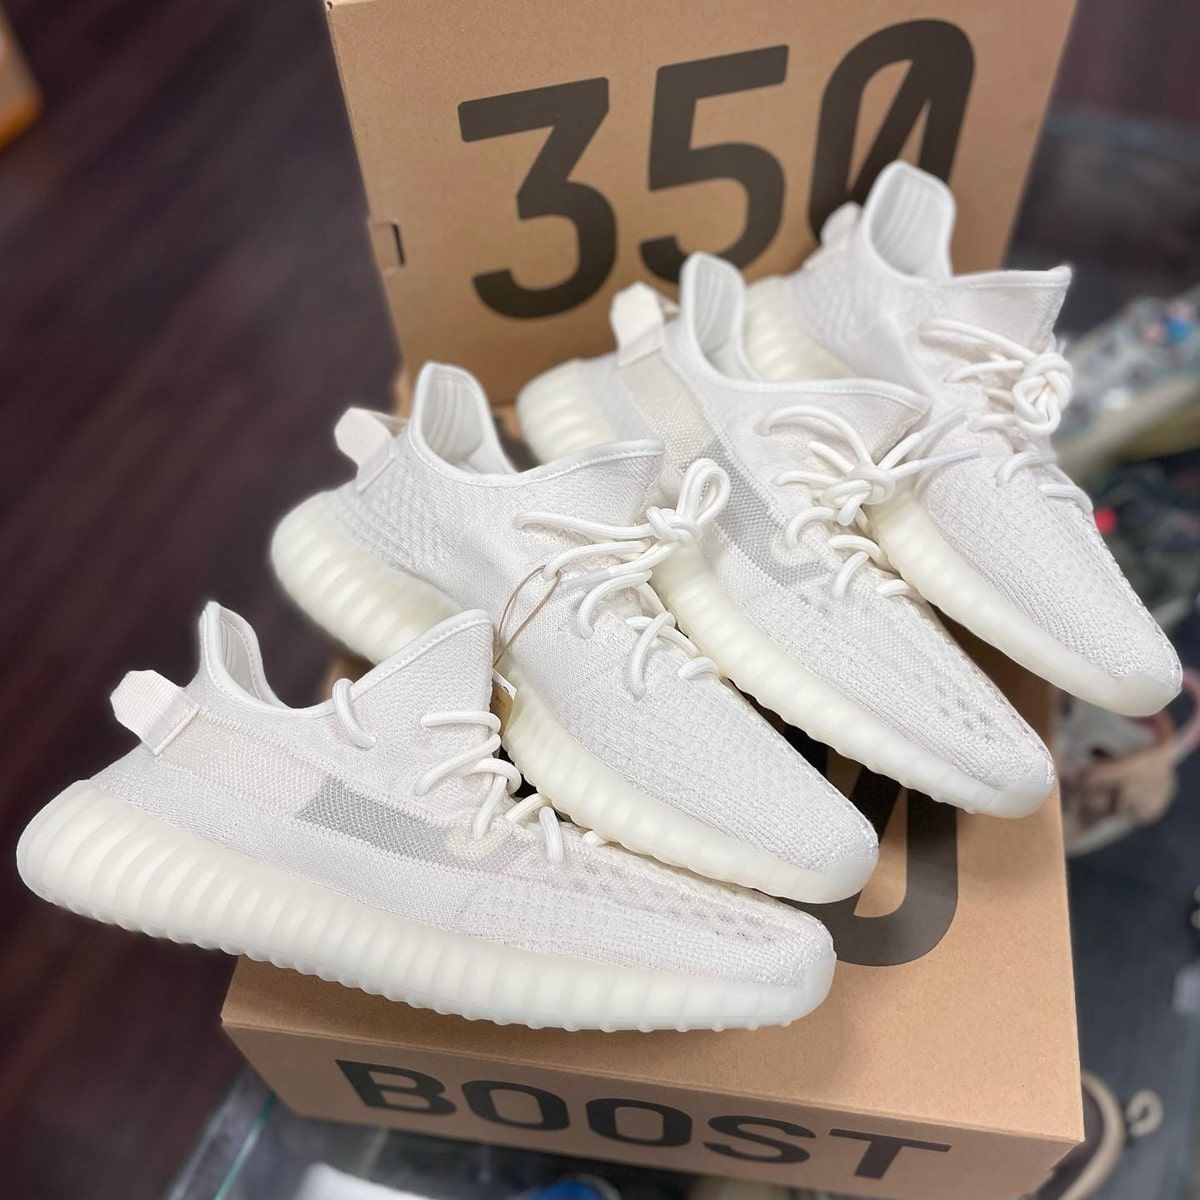 Conversely Constricted finance Where to Buy the YEEZY 350 V2 "Bone" Restock | HOUSE OF HEAT